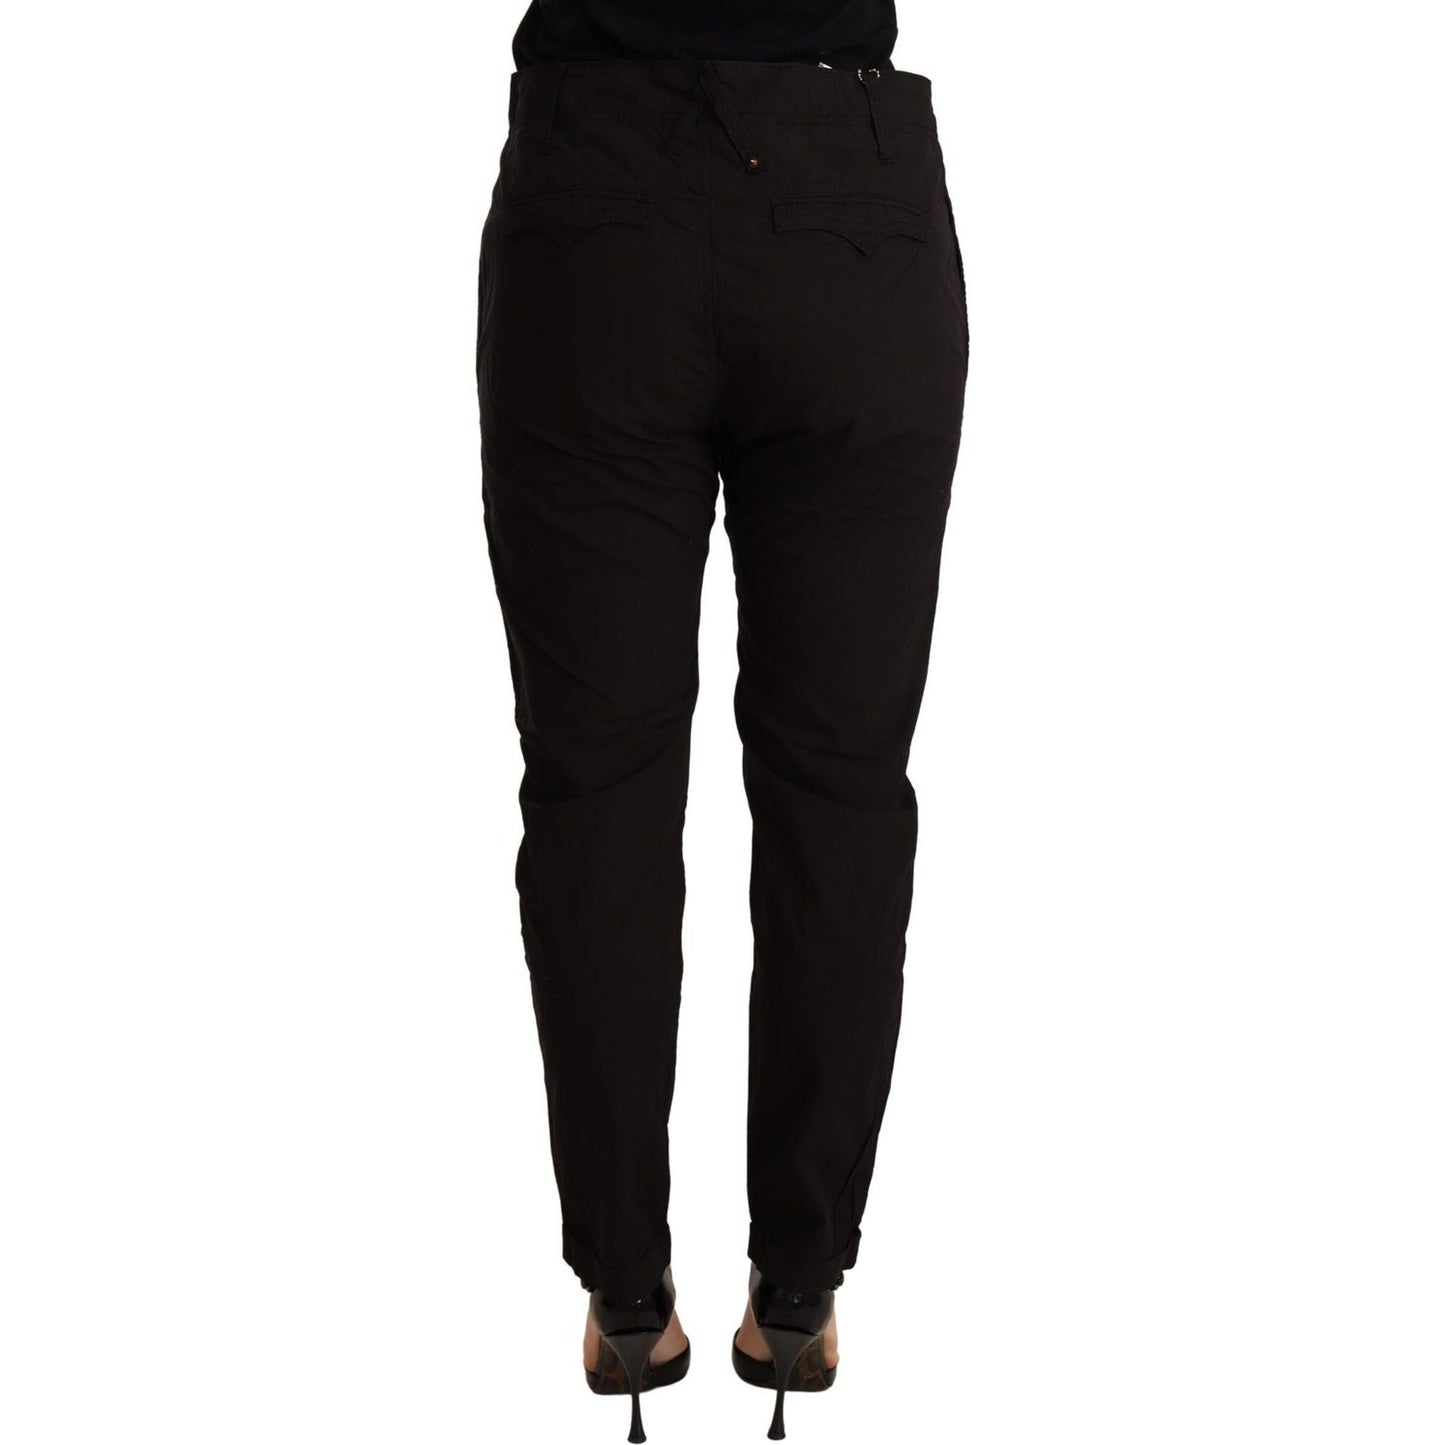 CYCLE Elegant Black Baggy Cotton Pants WOMAN TROUSERS black-mid-waist-baggy-fit-skinny-trouser IMG_5114-scaled-607929e0-4e3.jpg